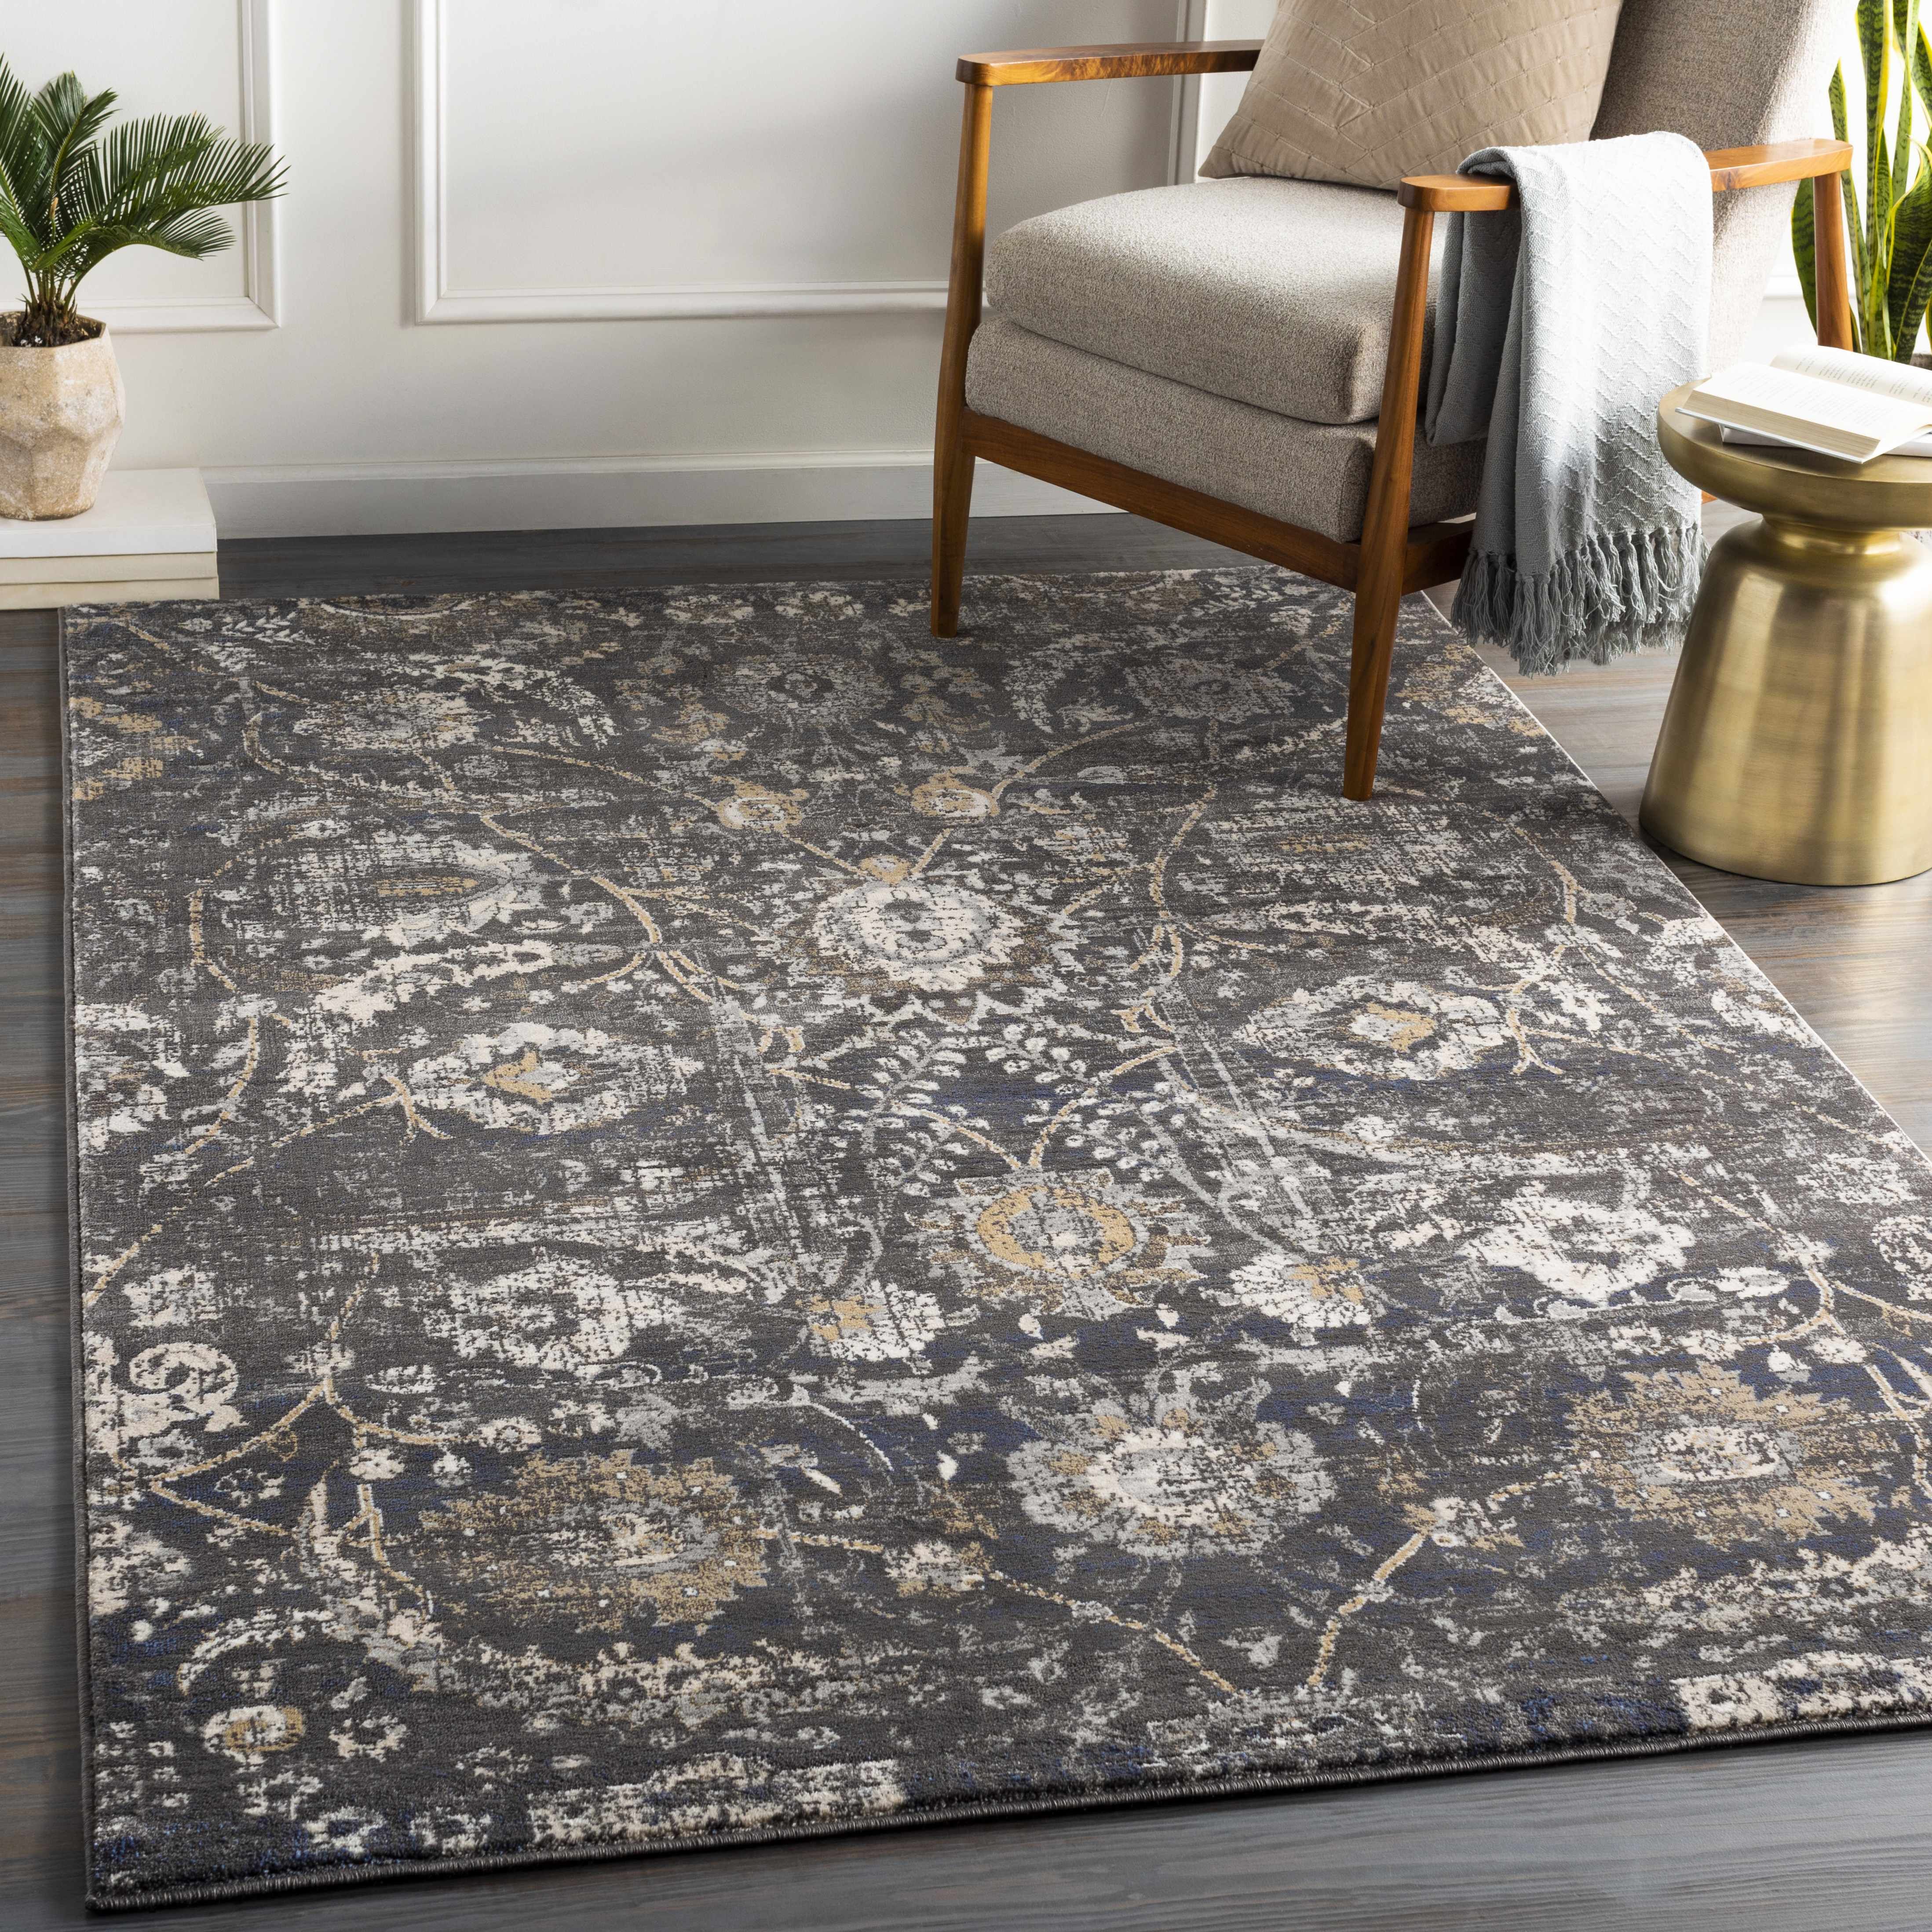 Owatonna Area Rug | Boutique Rugs